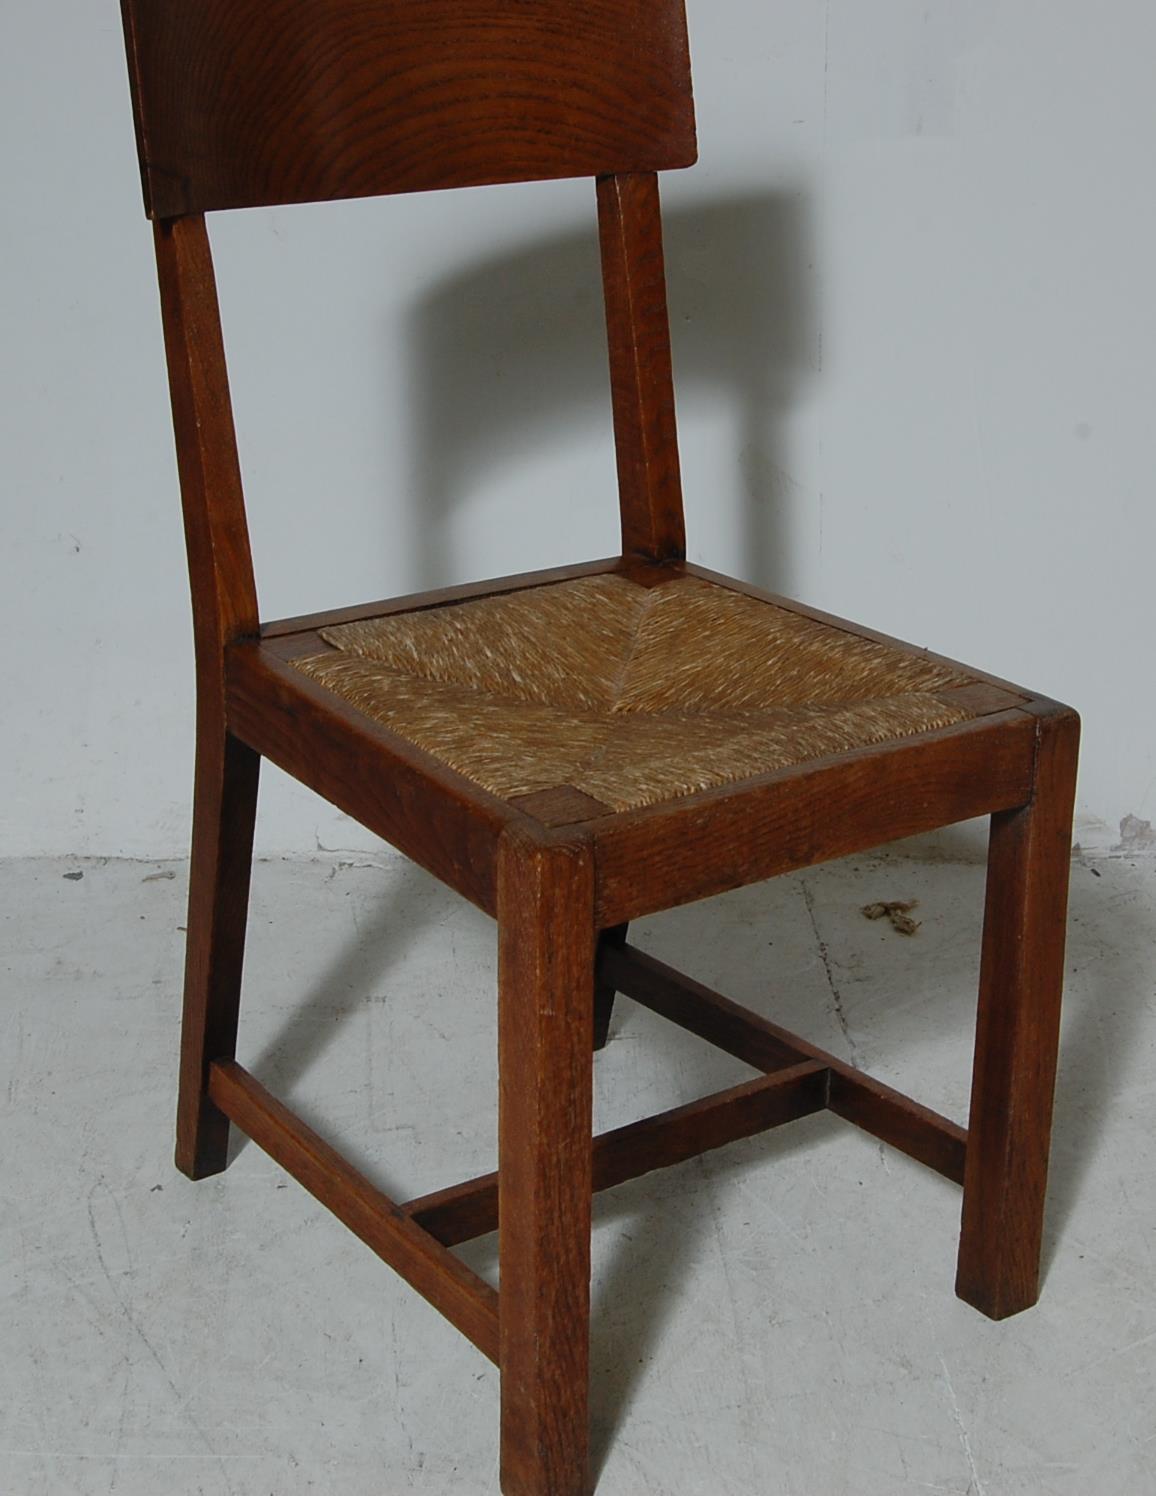 19TH CENTURY ARTS AND CRAFTS LIGHT OAK AND ELM CHAIR - Image 2 of 3